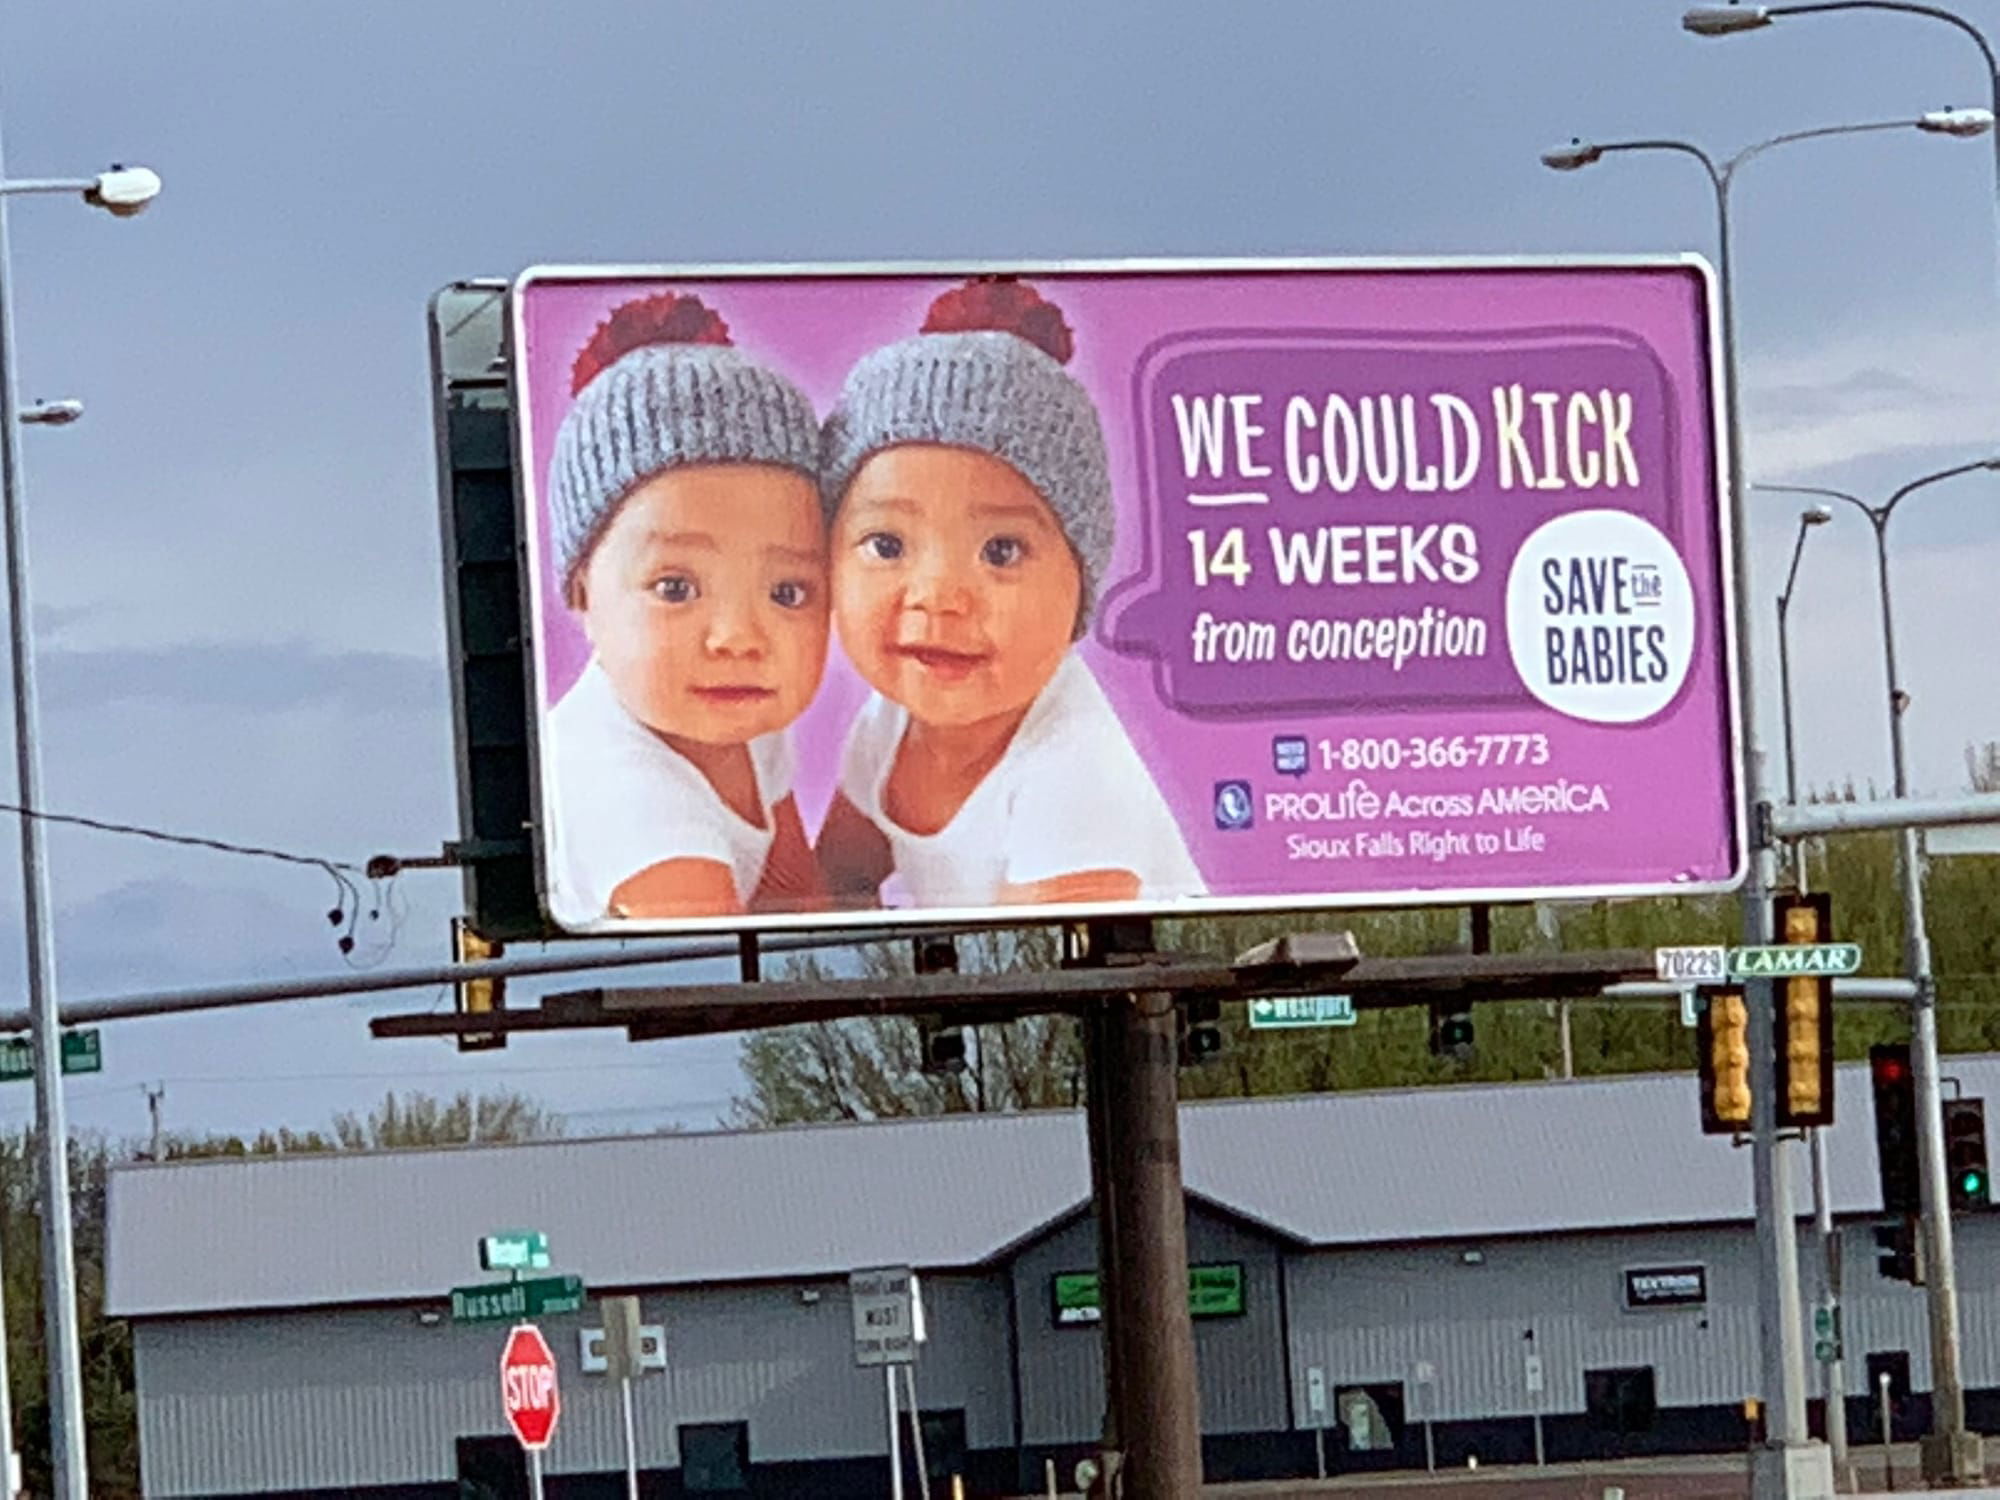 Russell Ave - Designed by Pro Life Across America